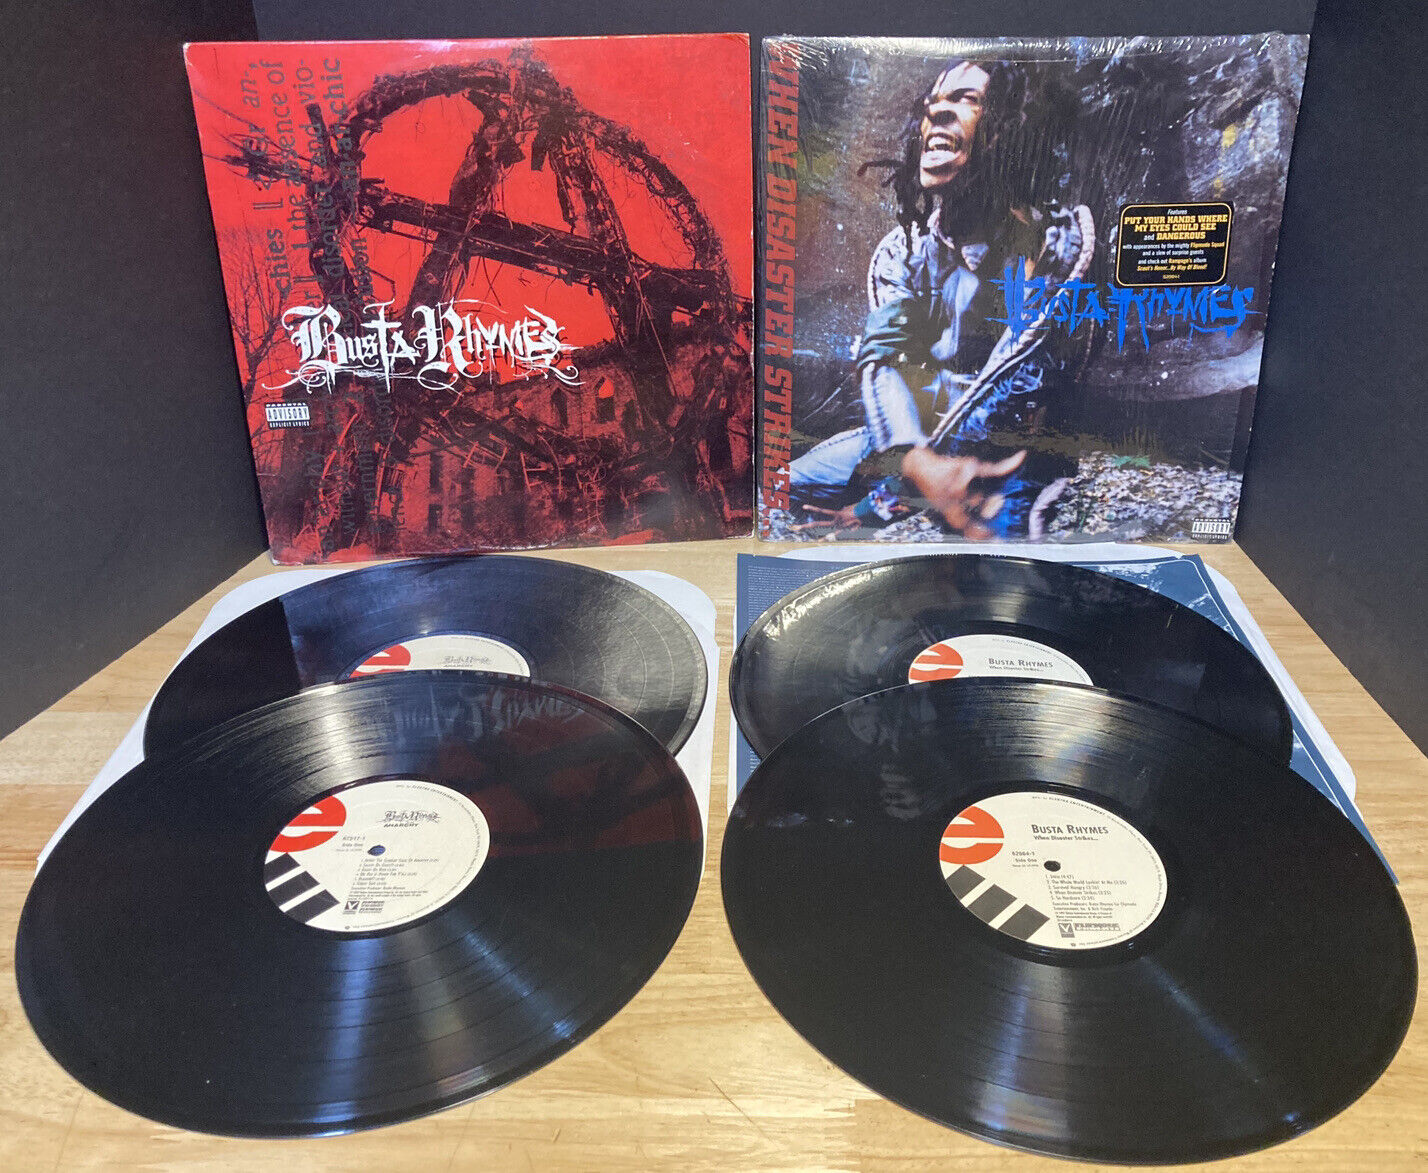 Busta Rhymes Vinyl Double LP 1997 When Disaster Strikes & 2000 Anarchy LOT of 2 